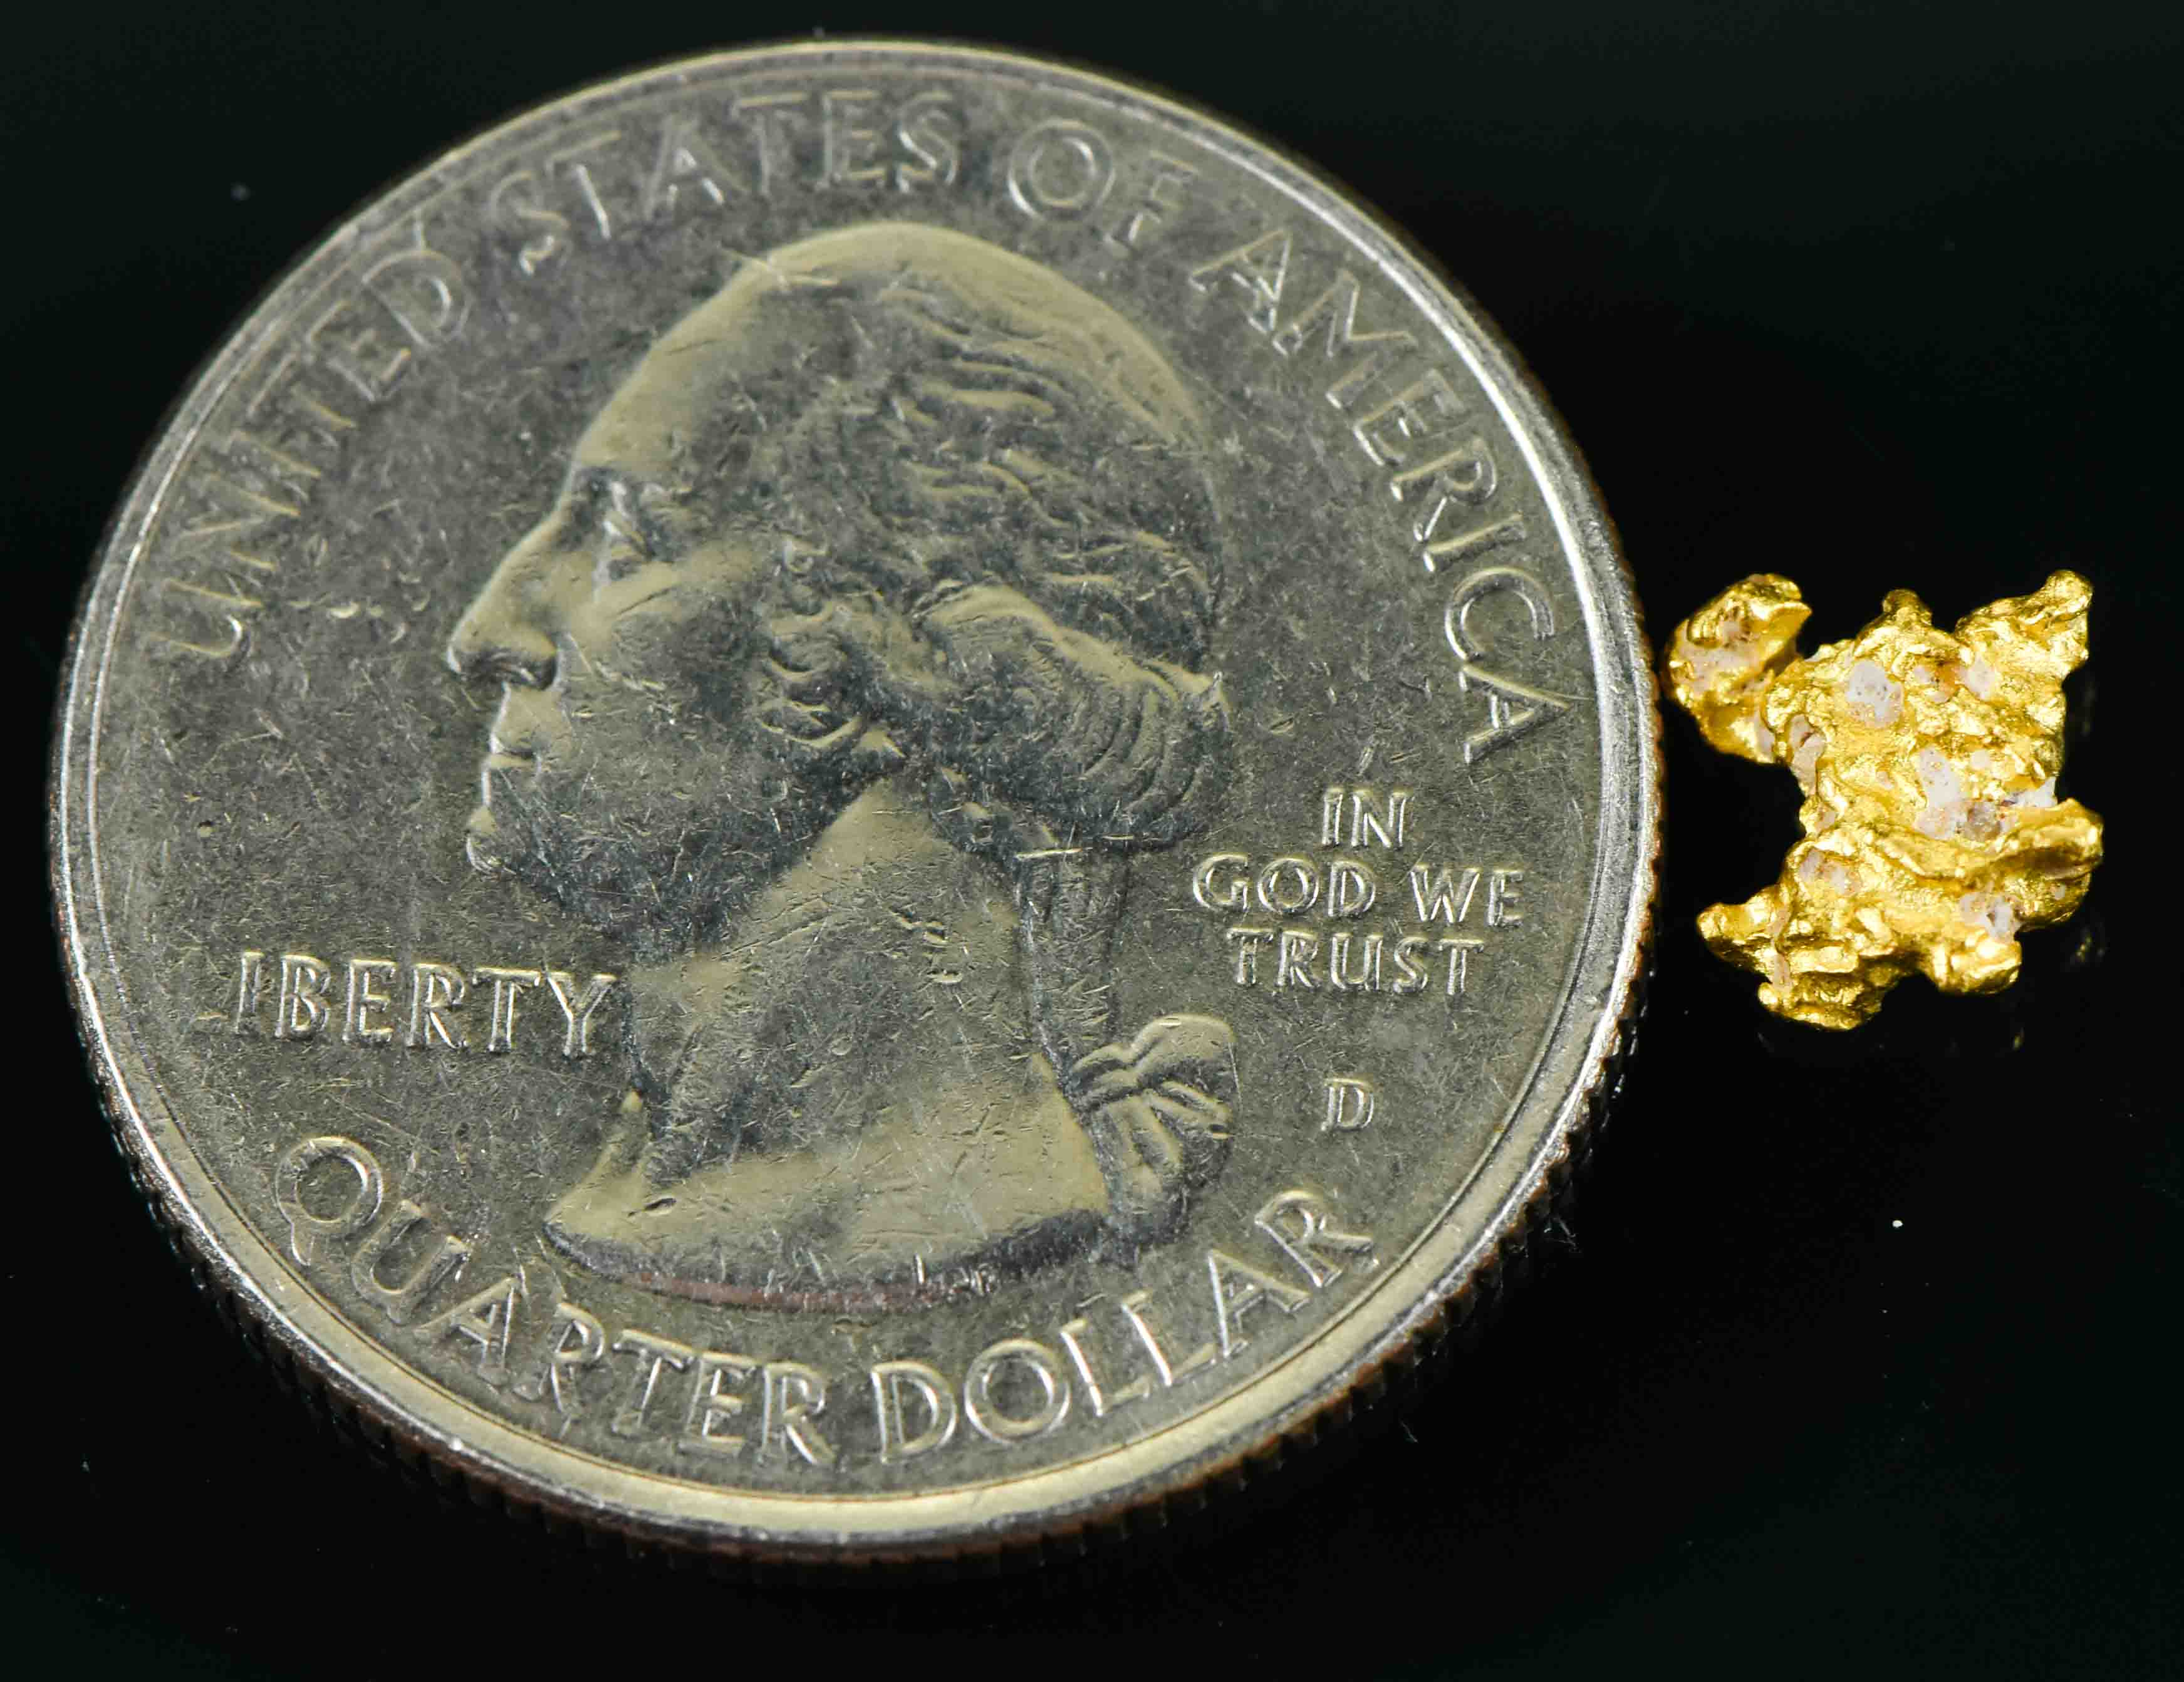 #29 Australian Natural Gold Nugget With Quartz Weighs .56 Grams.